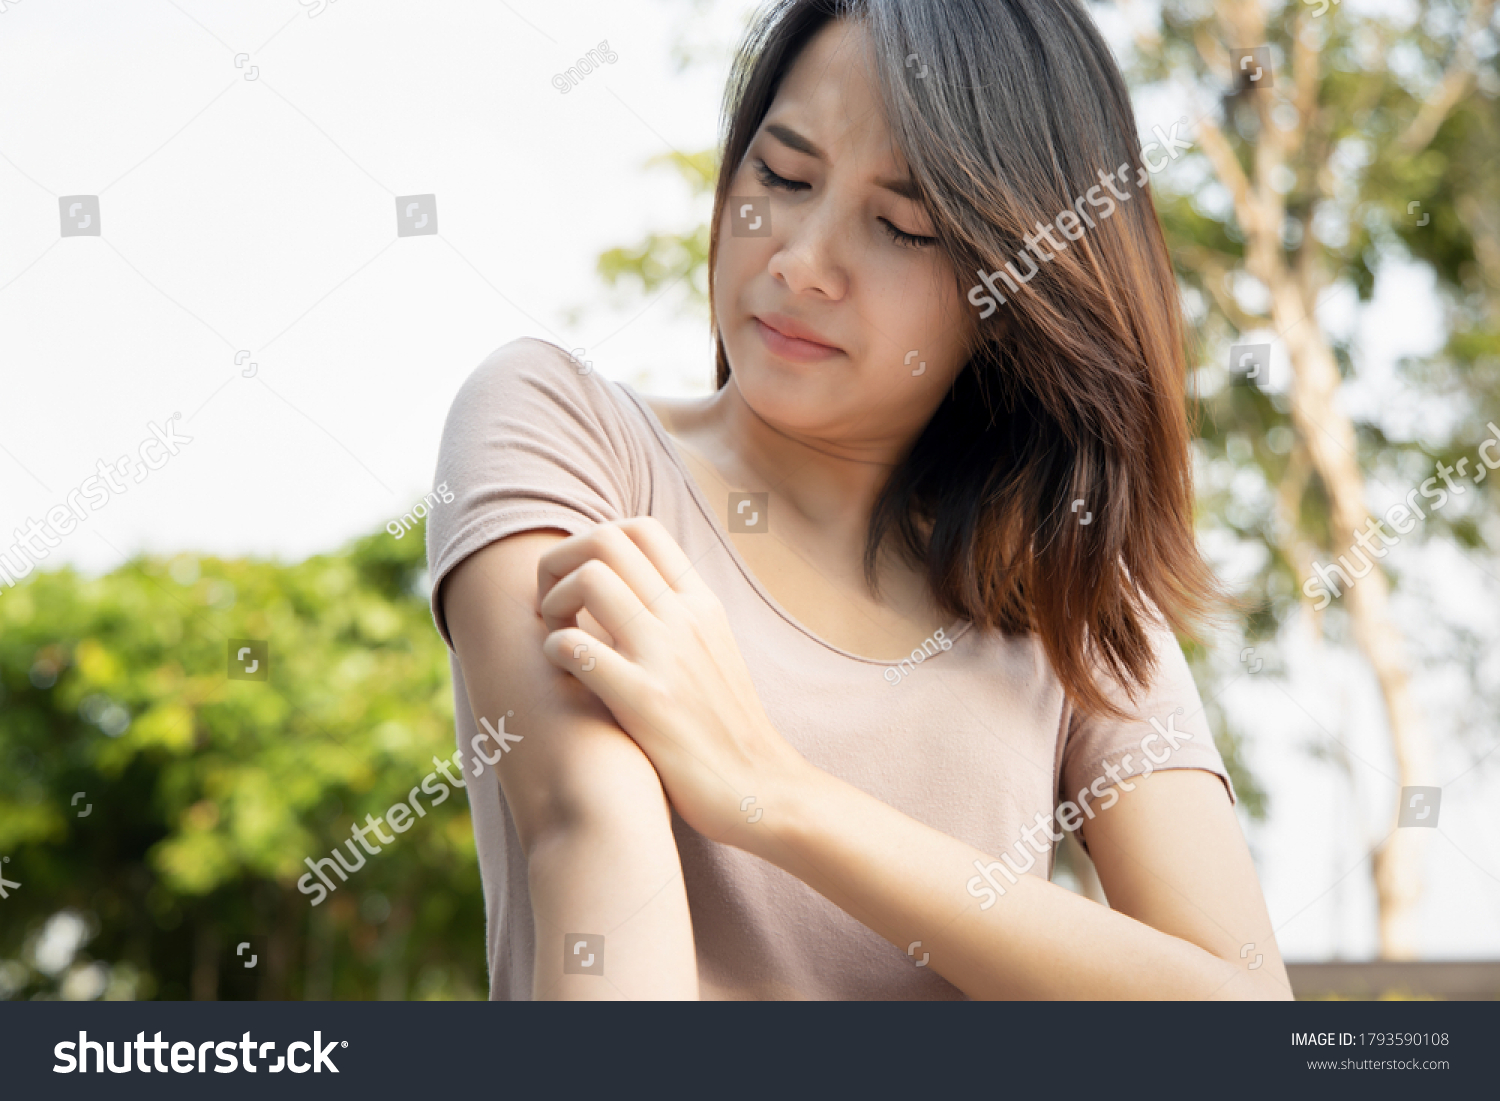 Asian woman scratching her arm; concept of dry skin, allergic skin inflammation, body care, fungus infection, eczema, dermatitis, rash, mosquito or insect bite #1793590108